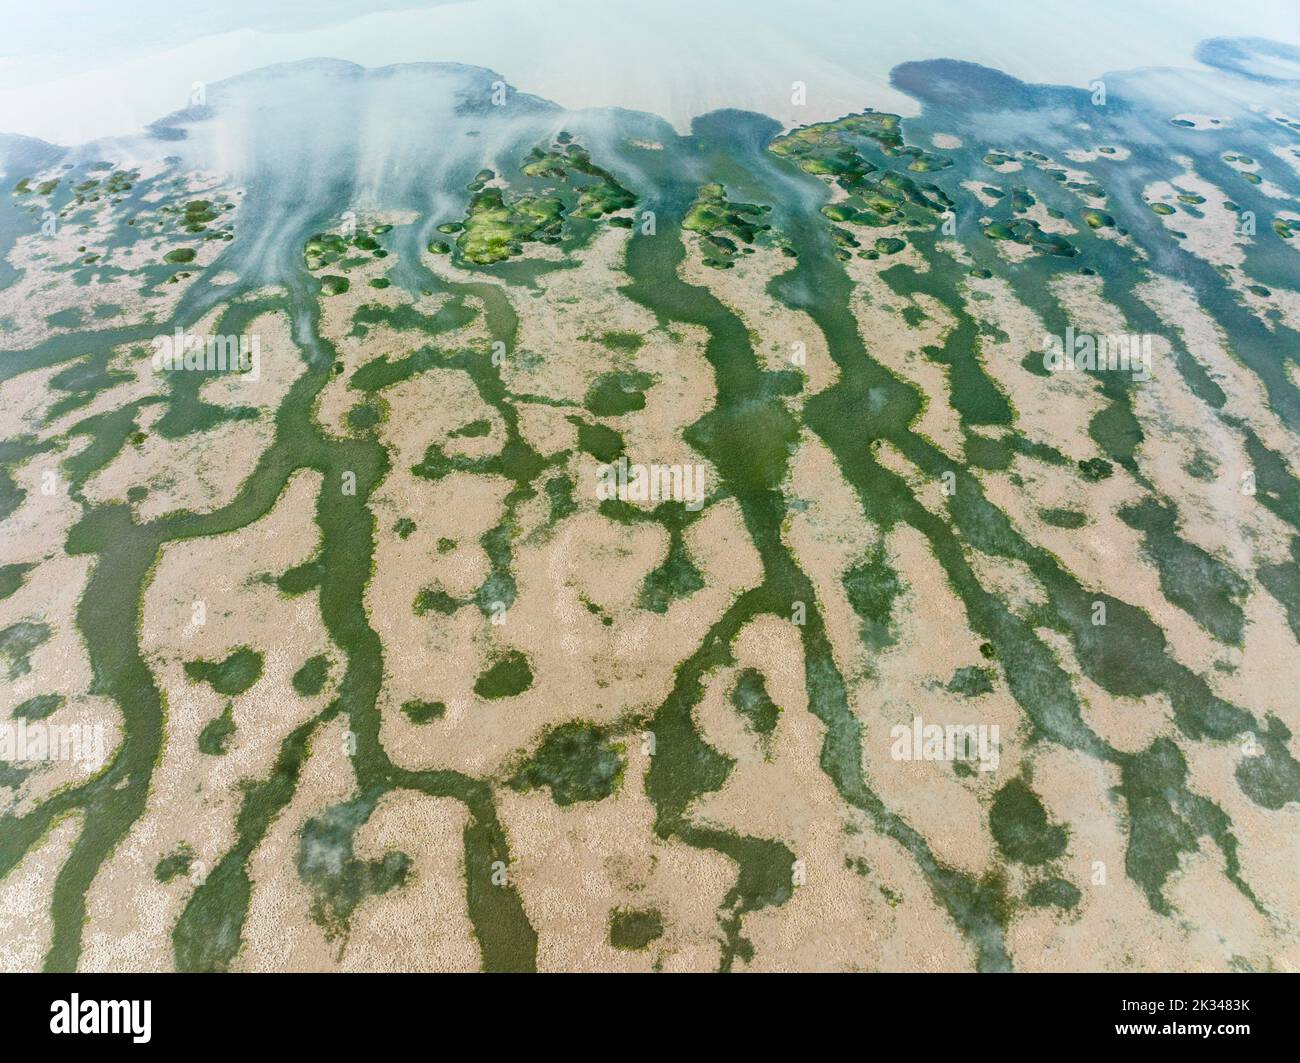 Network of channels and streams at low tide at their confluence with a larger body of water, in the marshland of the Bahia de Cadiz, aerial view Stock Photo